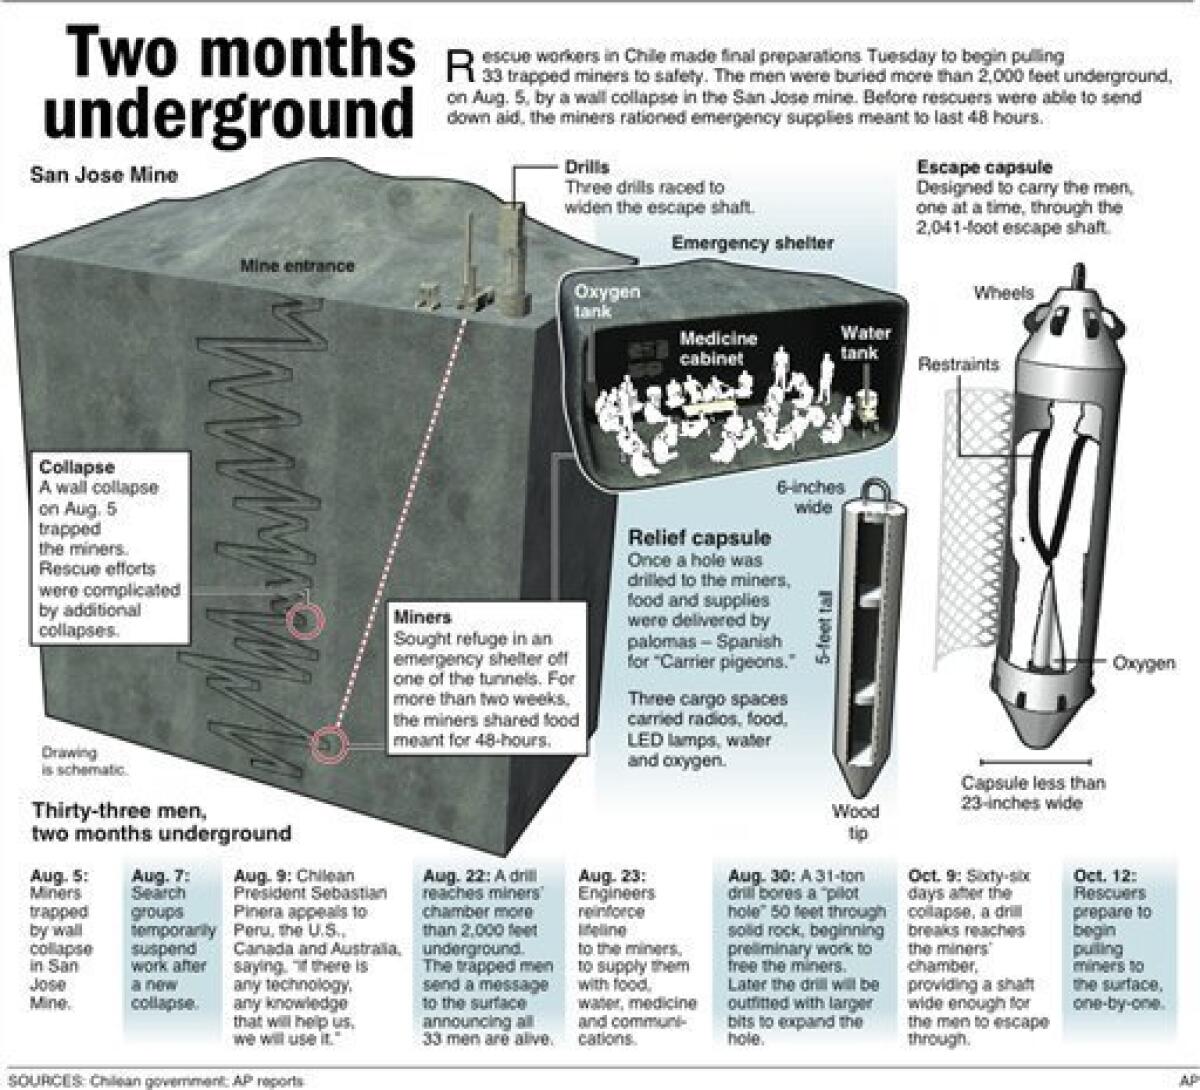 Graphic with illustration and timeline provides background about the Aug. 5 mine collapse in Chile and the ensuing rescue effort